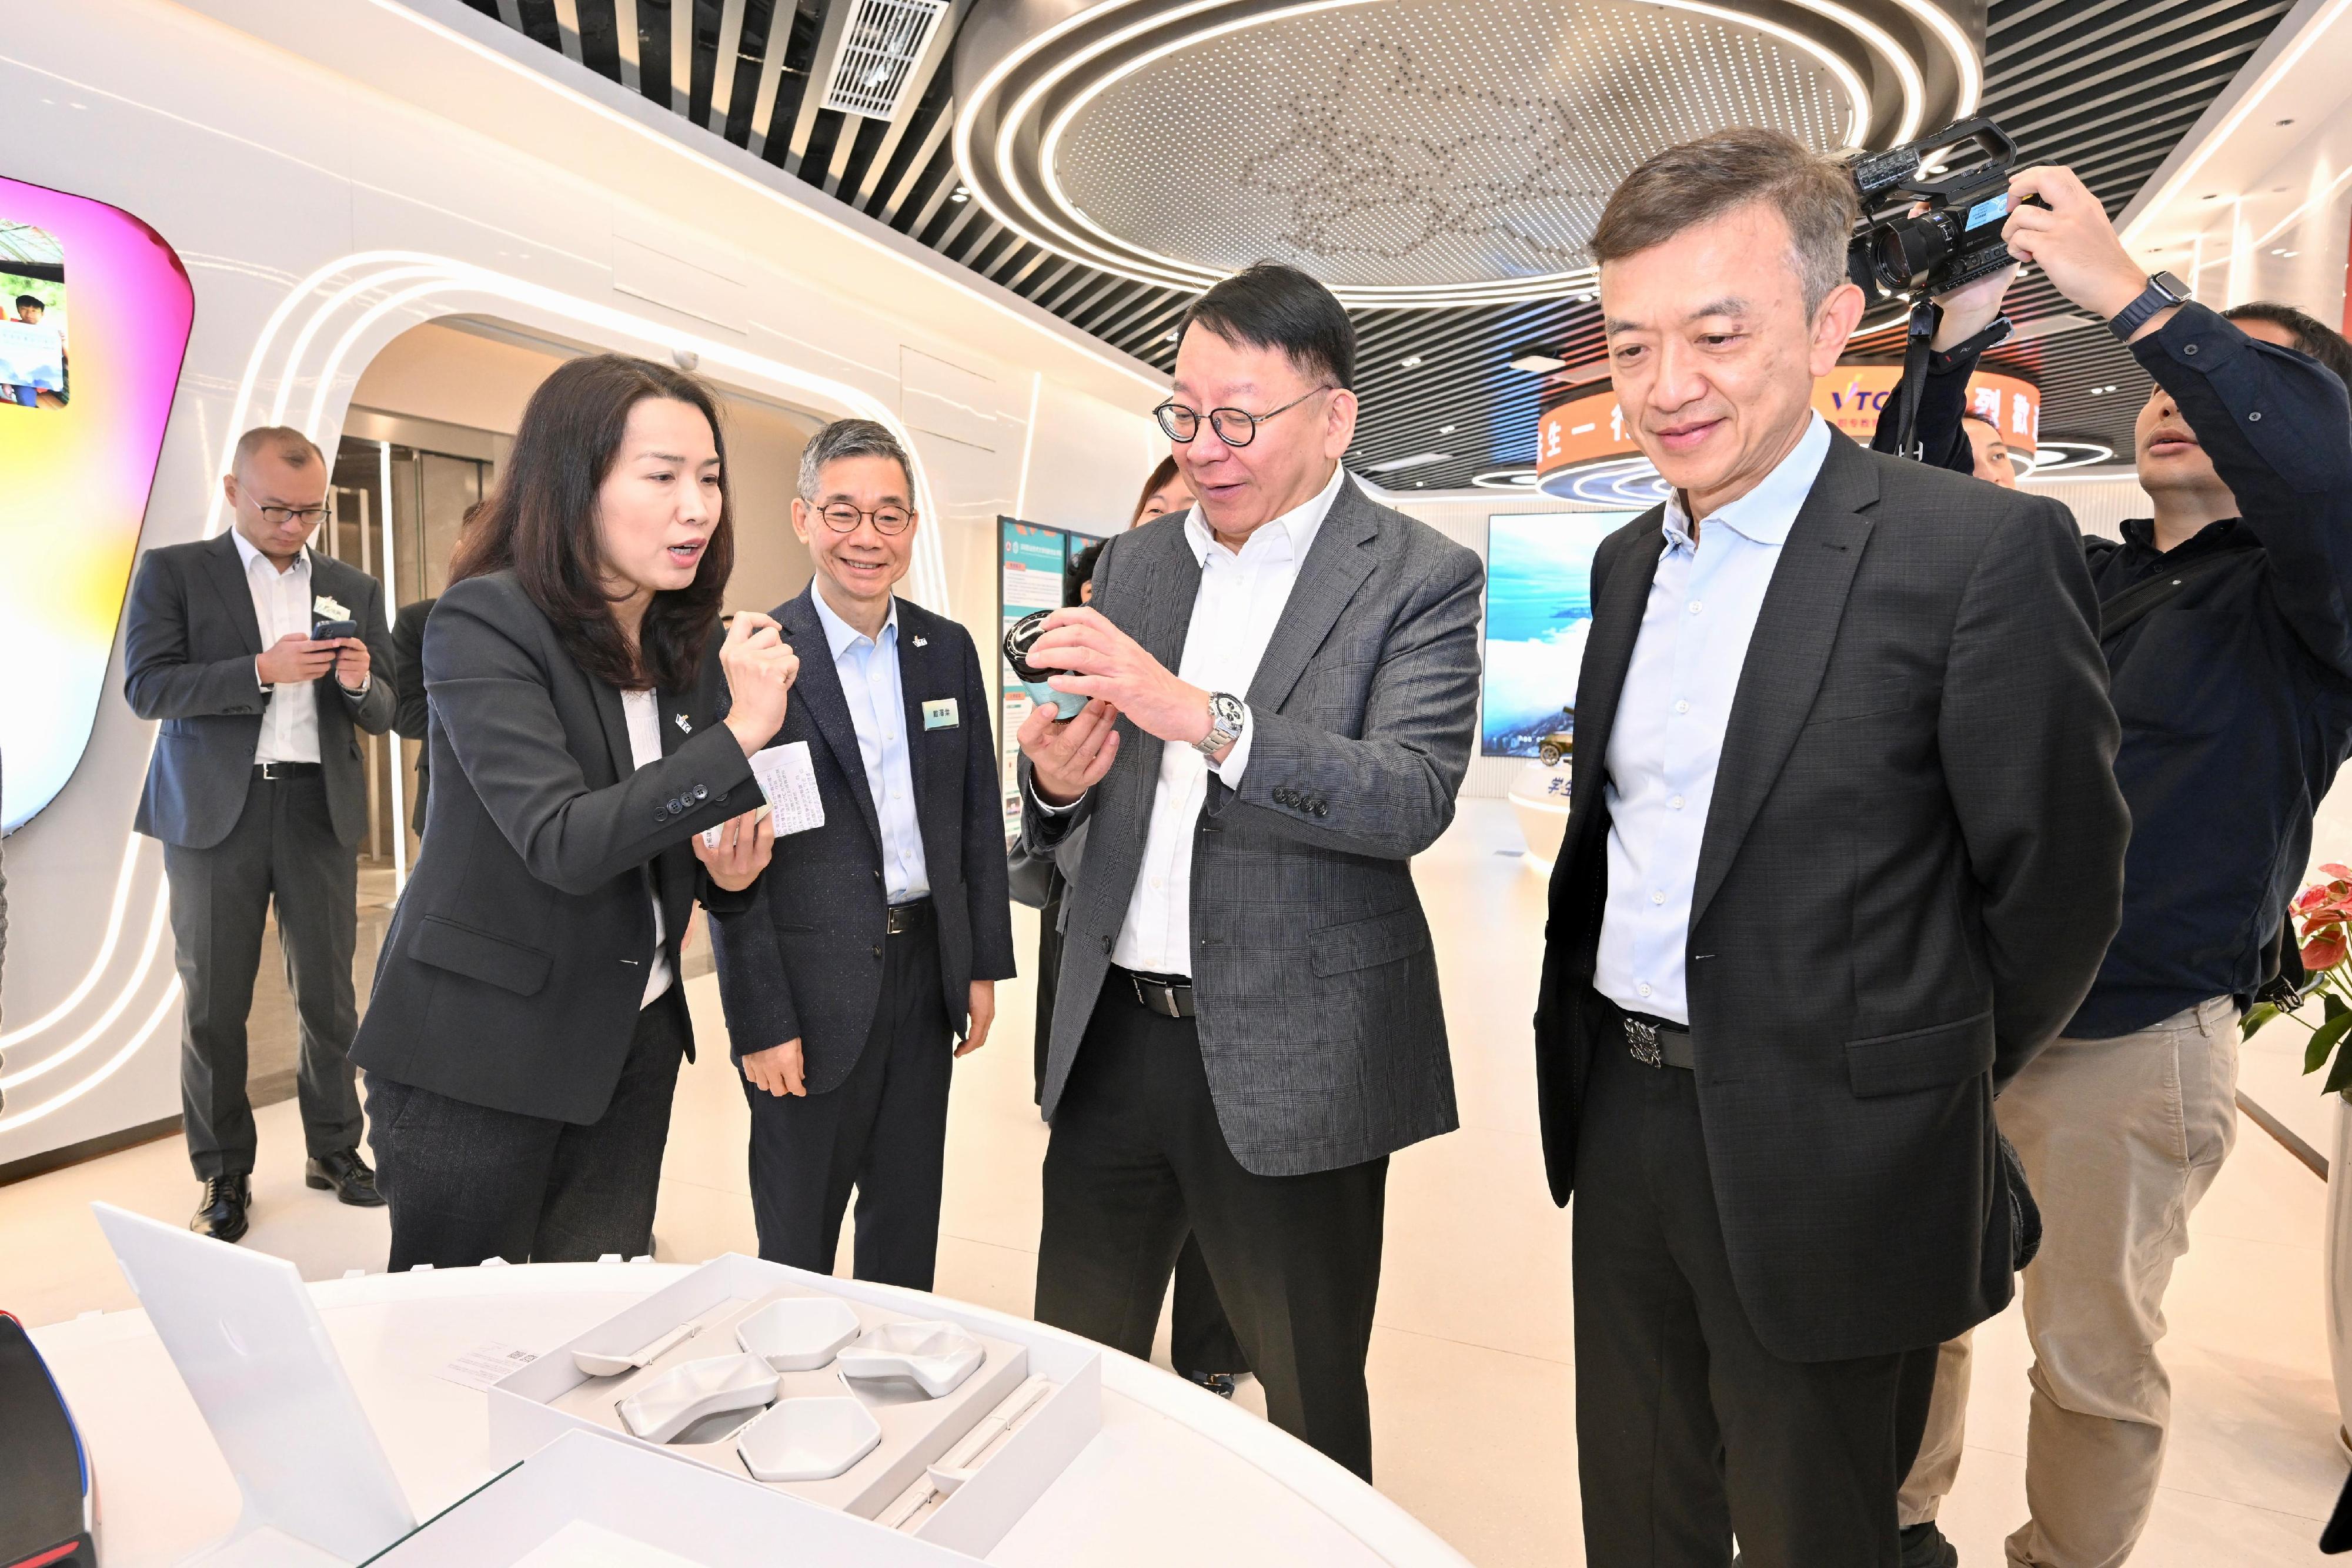 The Chief Secretary for Administration, Mr Chan Kwok-ki, today (January 10) visited Shenzhen and concluded his visit to Mainland cities of the Guangdong-Hong Kong-Macao Greater Bay Area. Photo shows Mr Chan (third right) being briefed in the exhibition hall of the Vocational and Professional Education Services (Shenzhen) Company Limited. Next to him is the Chairman of the Hong Kong Vocational Training Council, Mr Tony Tai (fourth right).